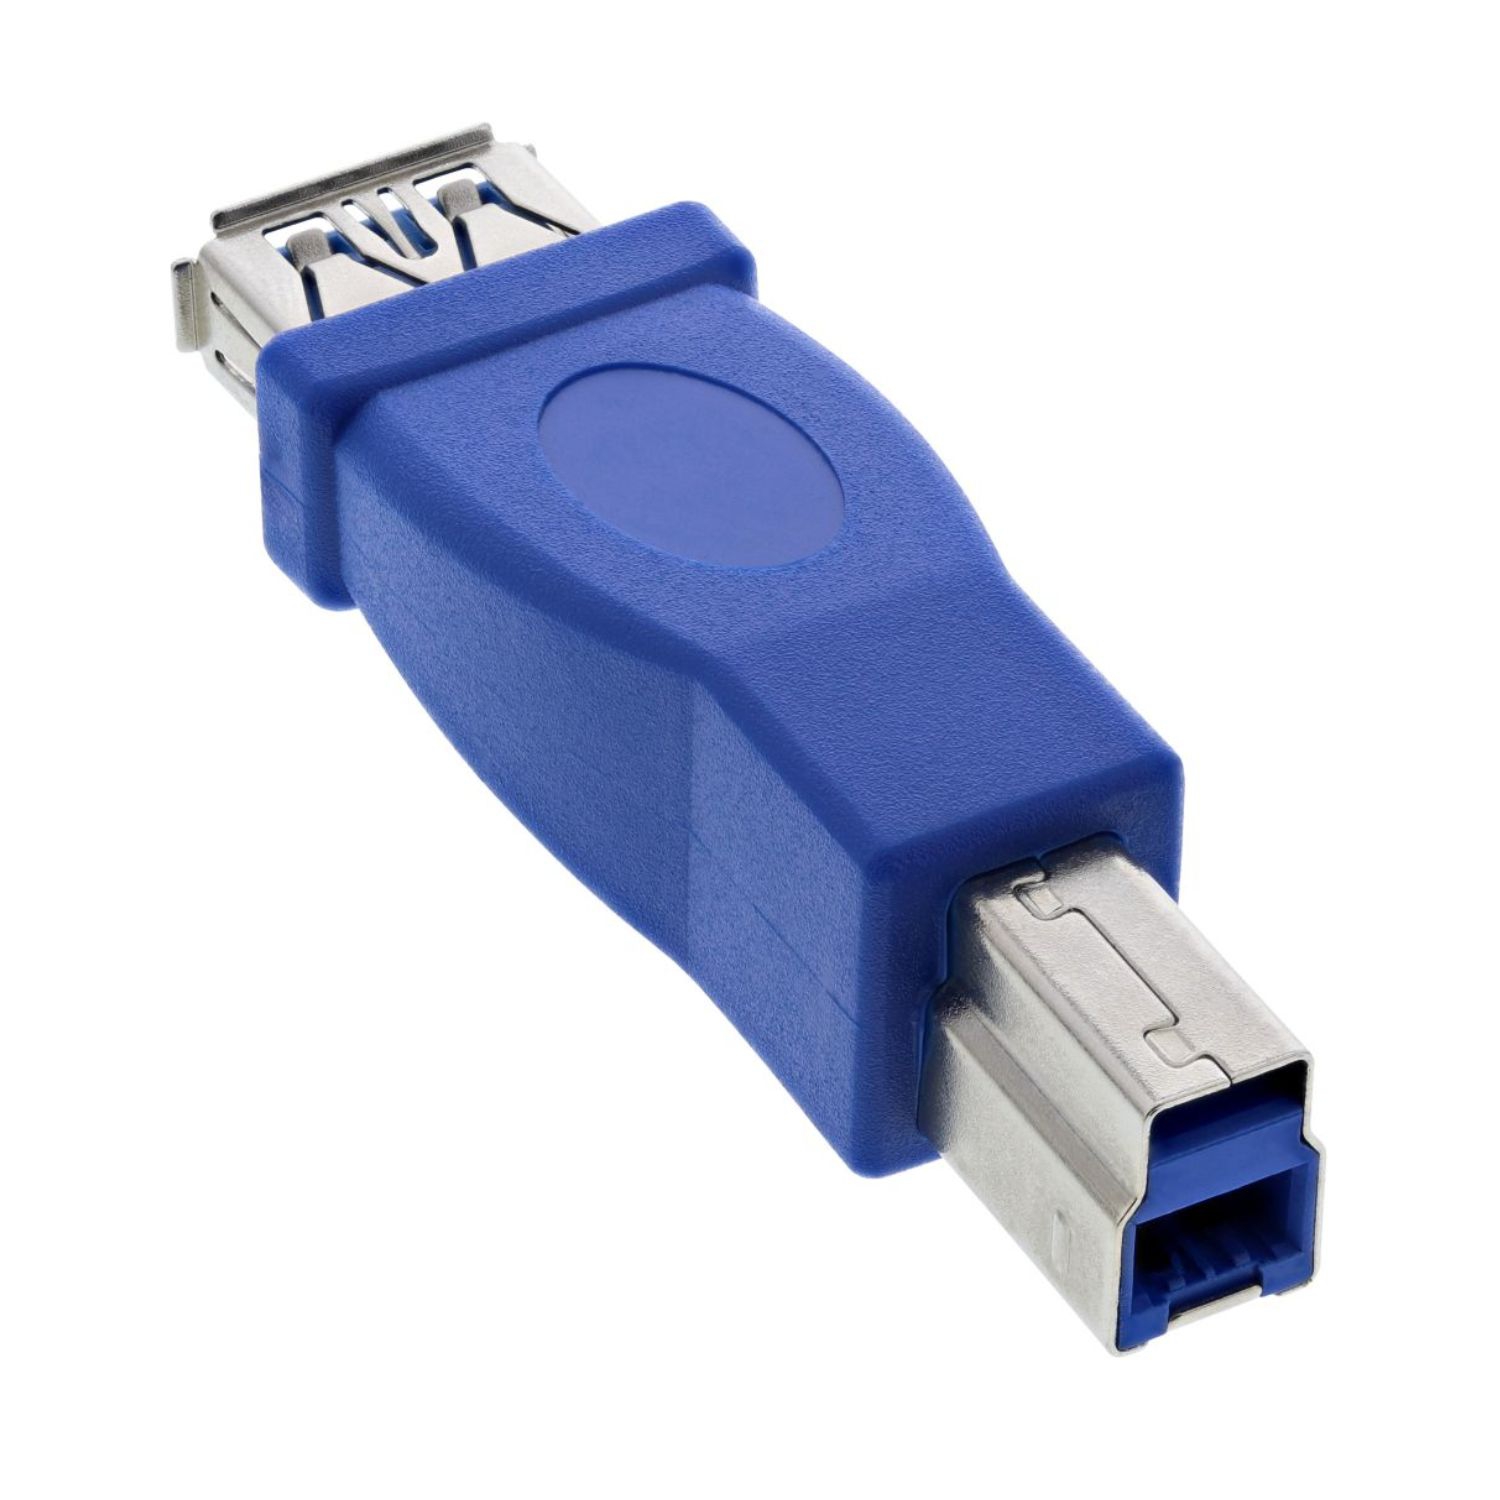 USB 3.0 adapter A female to B male